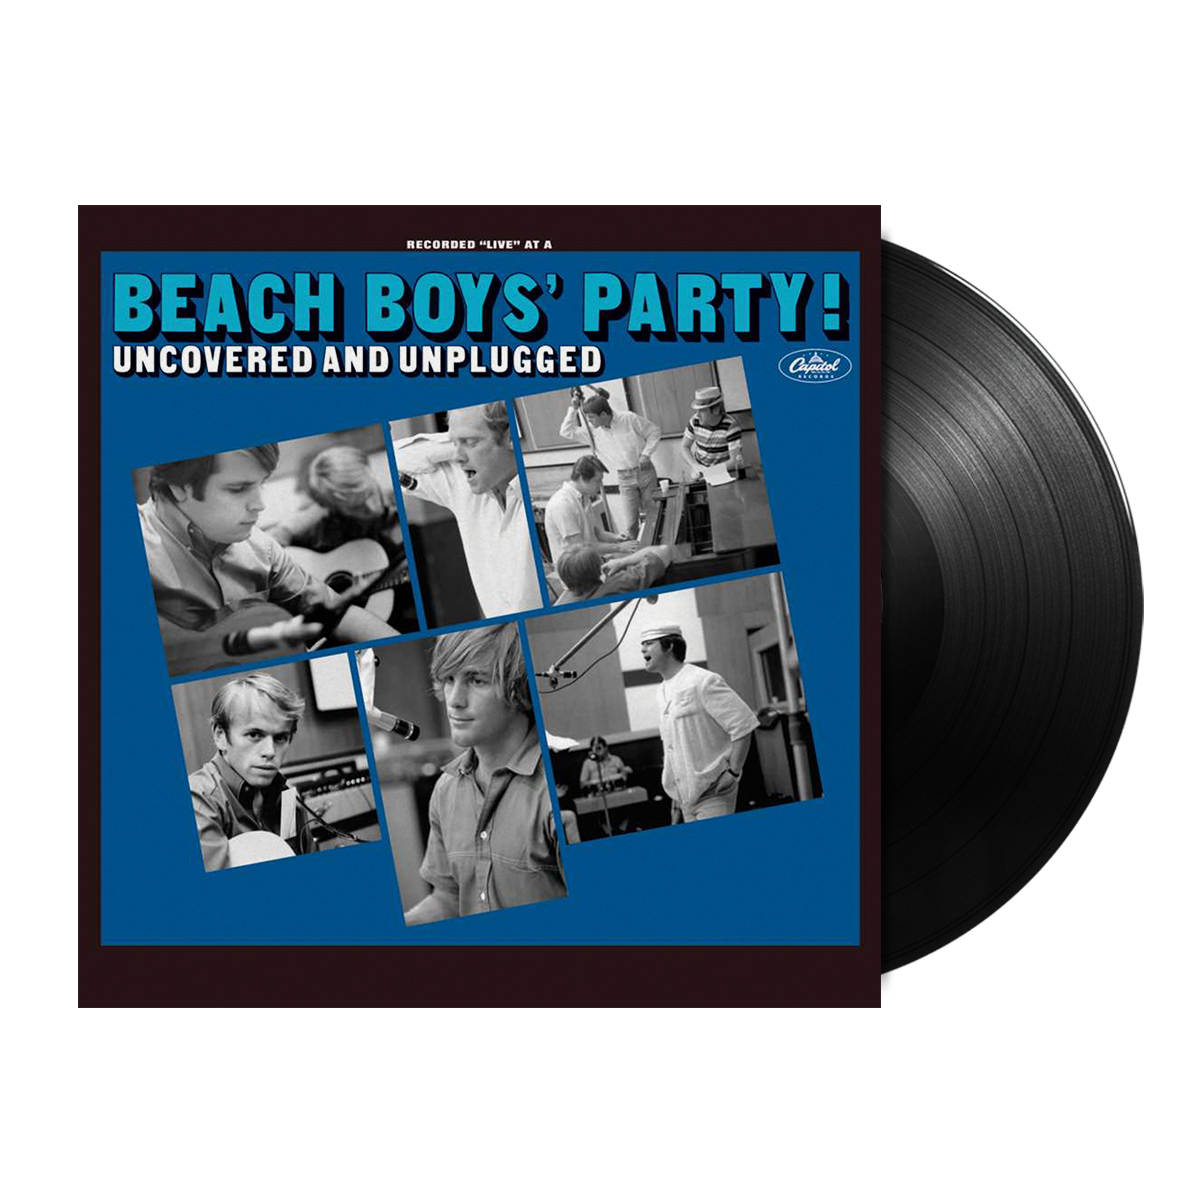 The Beach Boys - The Beach Boys' Party! Uncovered And Unplugged LP